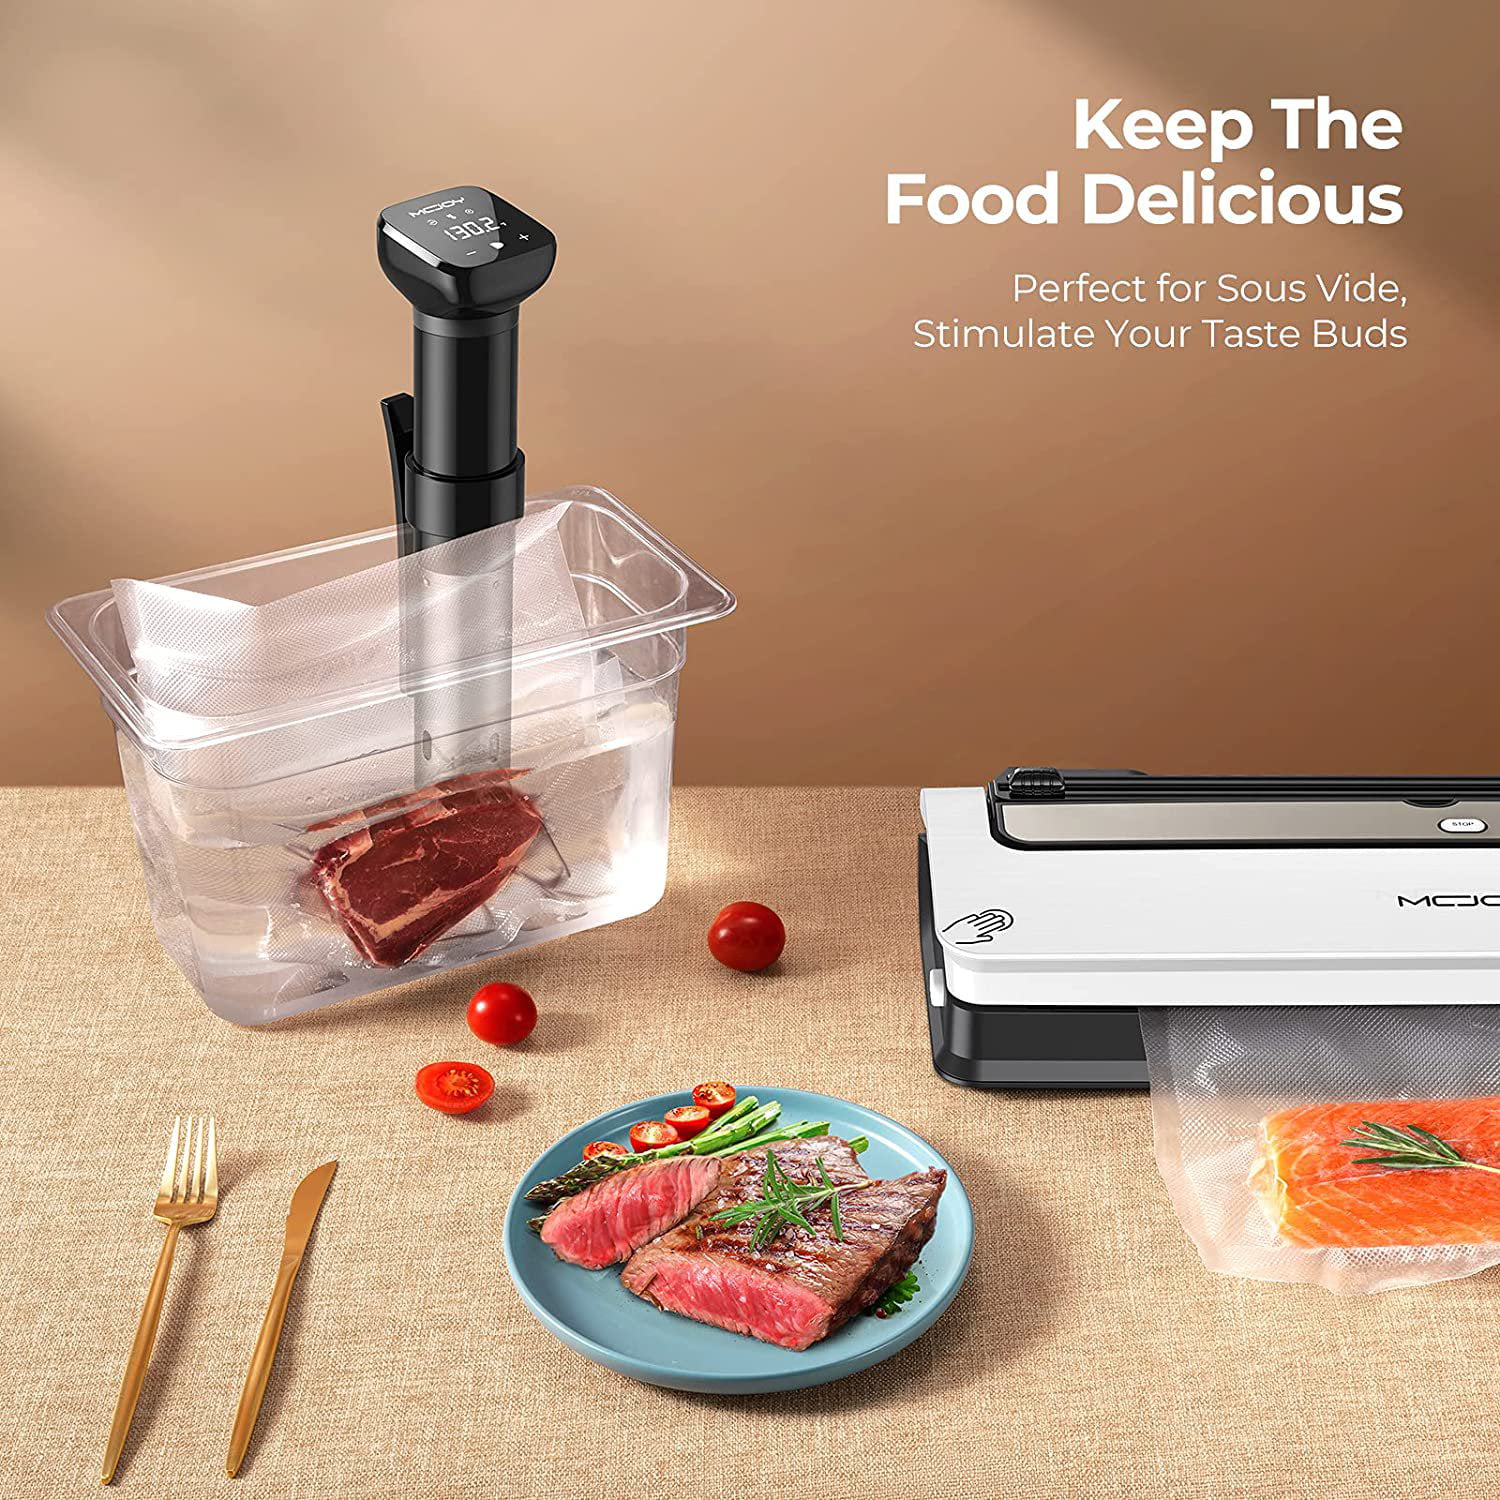  Full Automatic Vacuum Sealer Machine GHVACZS AP-18 Food Vacuum  Sealer with 7MM Heating wire, LED Touch Screen & Dry & Moist Food  Preservation Modes, Double Motors Bag Sealer with Starter Kit